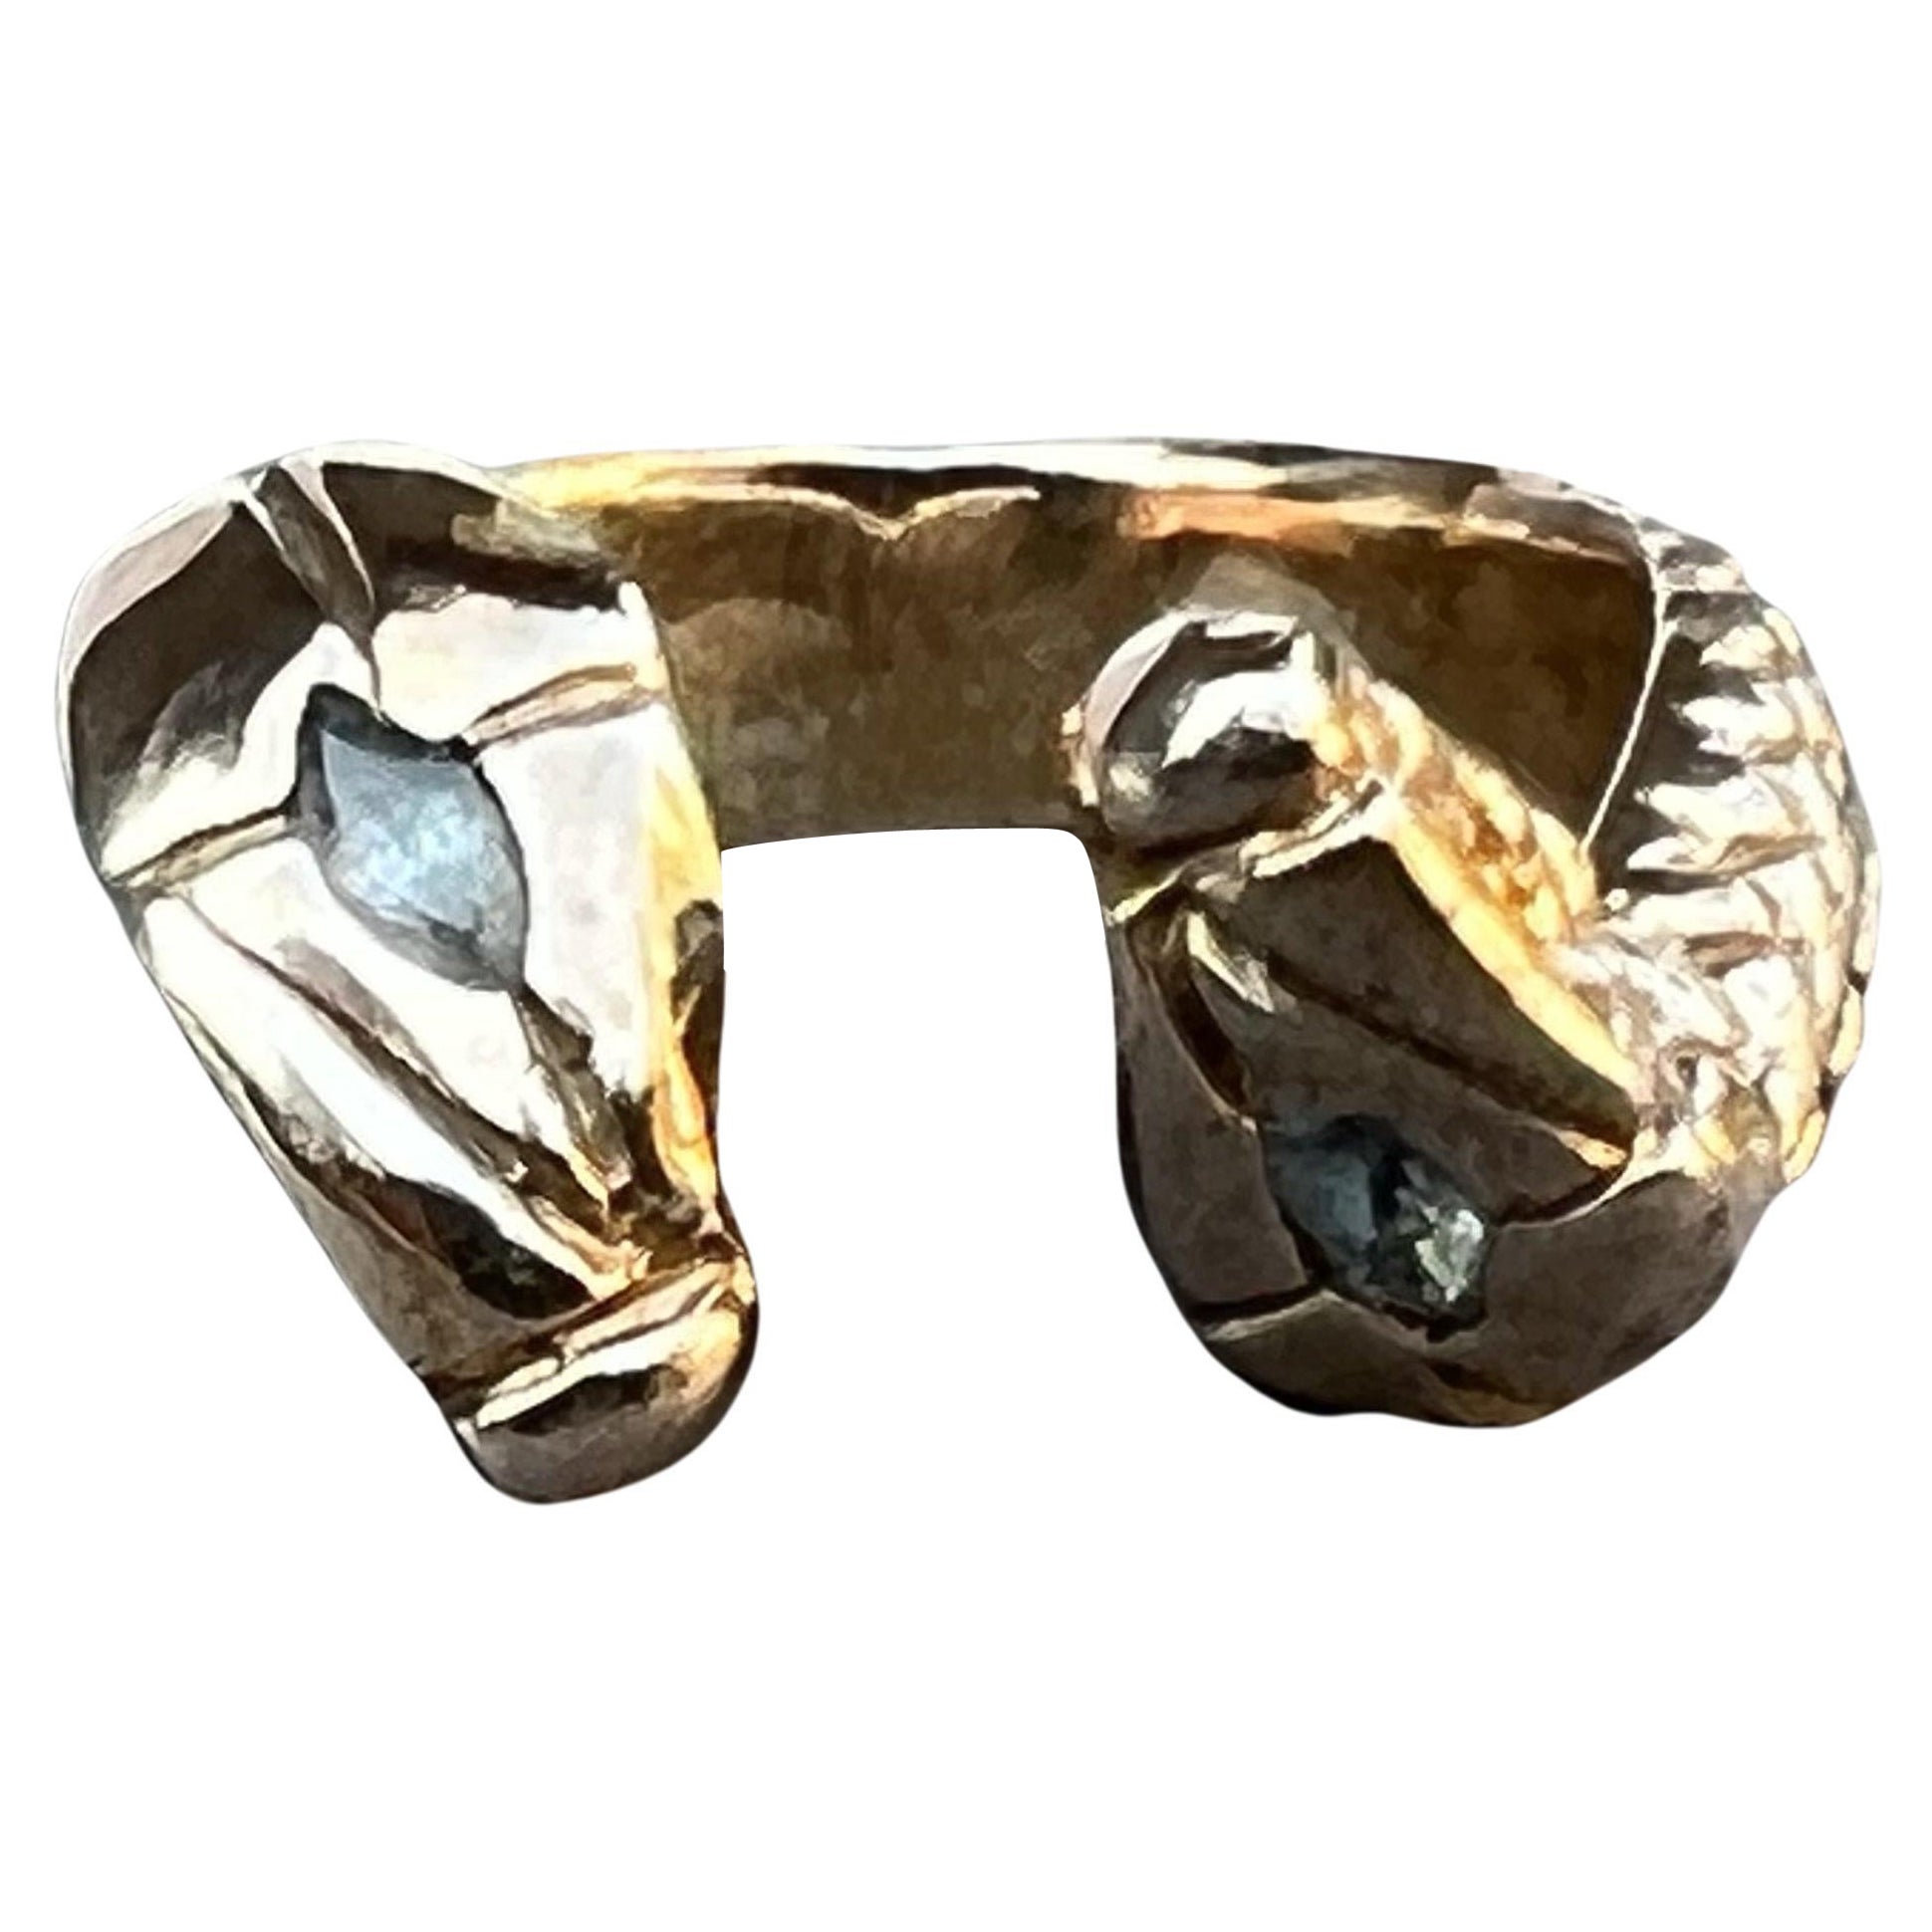 Animal Jewelry 2 Marquis Aquamarine Double Snake Head Ring Cocktail Bronze Adjustable J Dauphin

This ring has two large aquamarine marquis on each head of the snake. Its a great gift as it is adjustable - and you can use on any finger and just